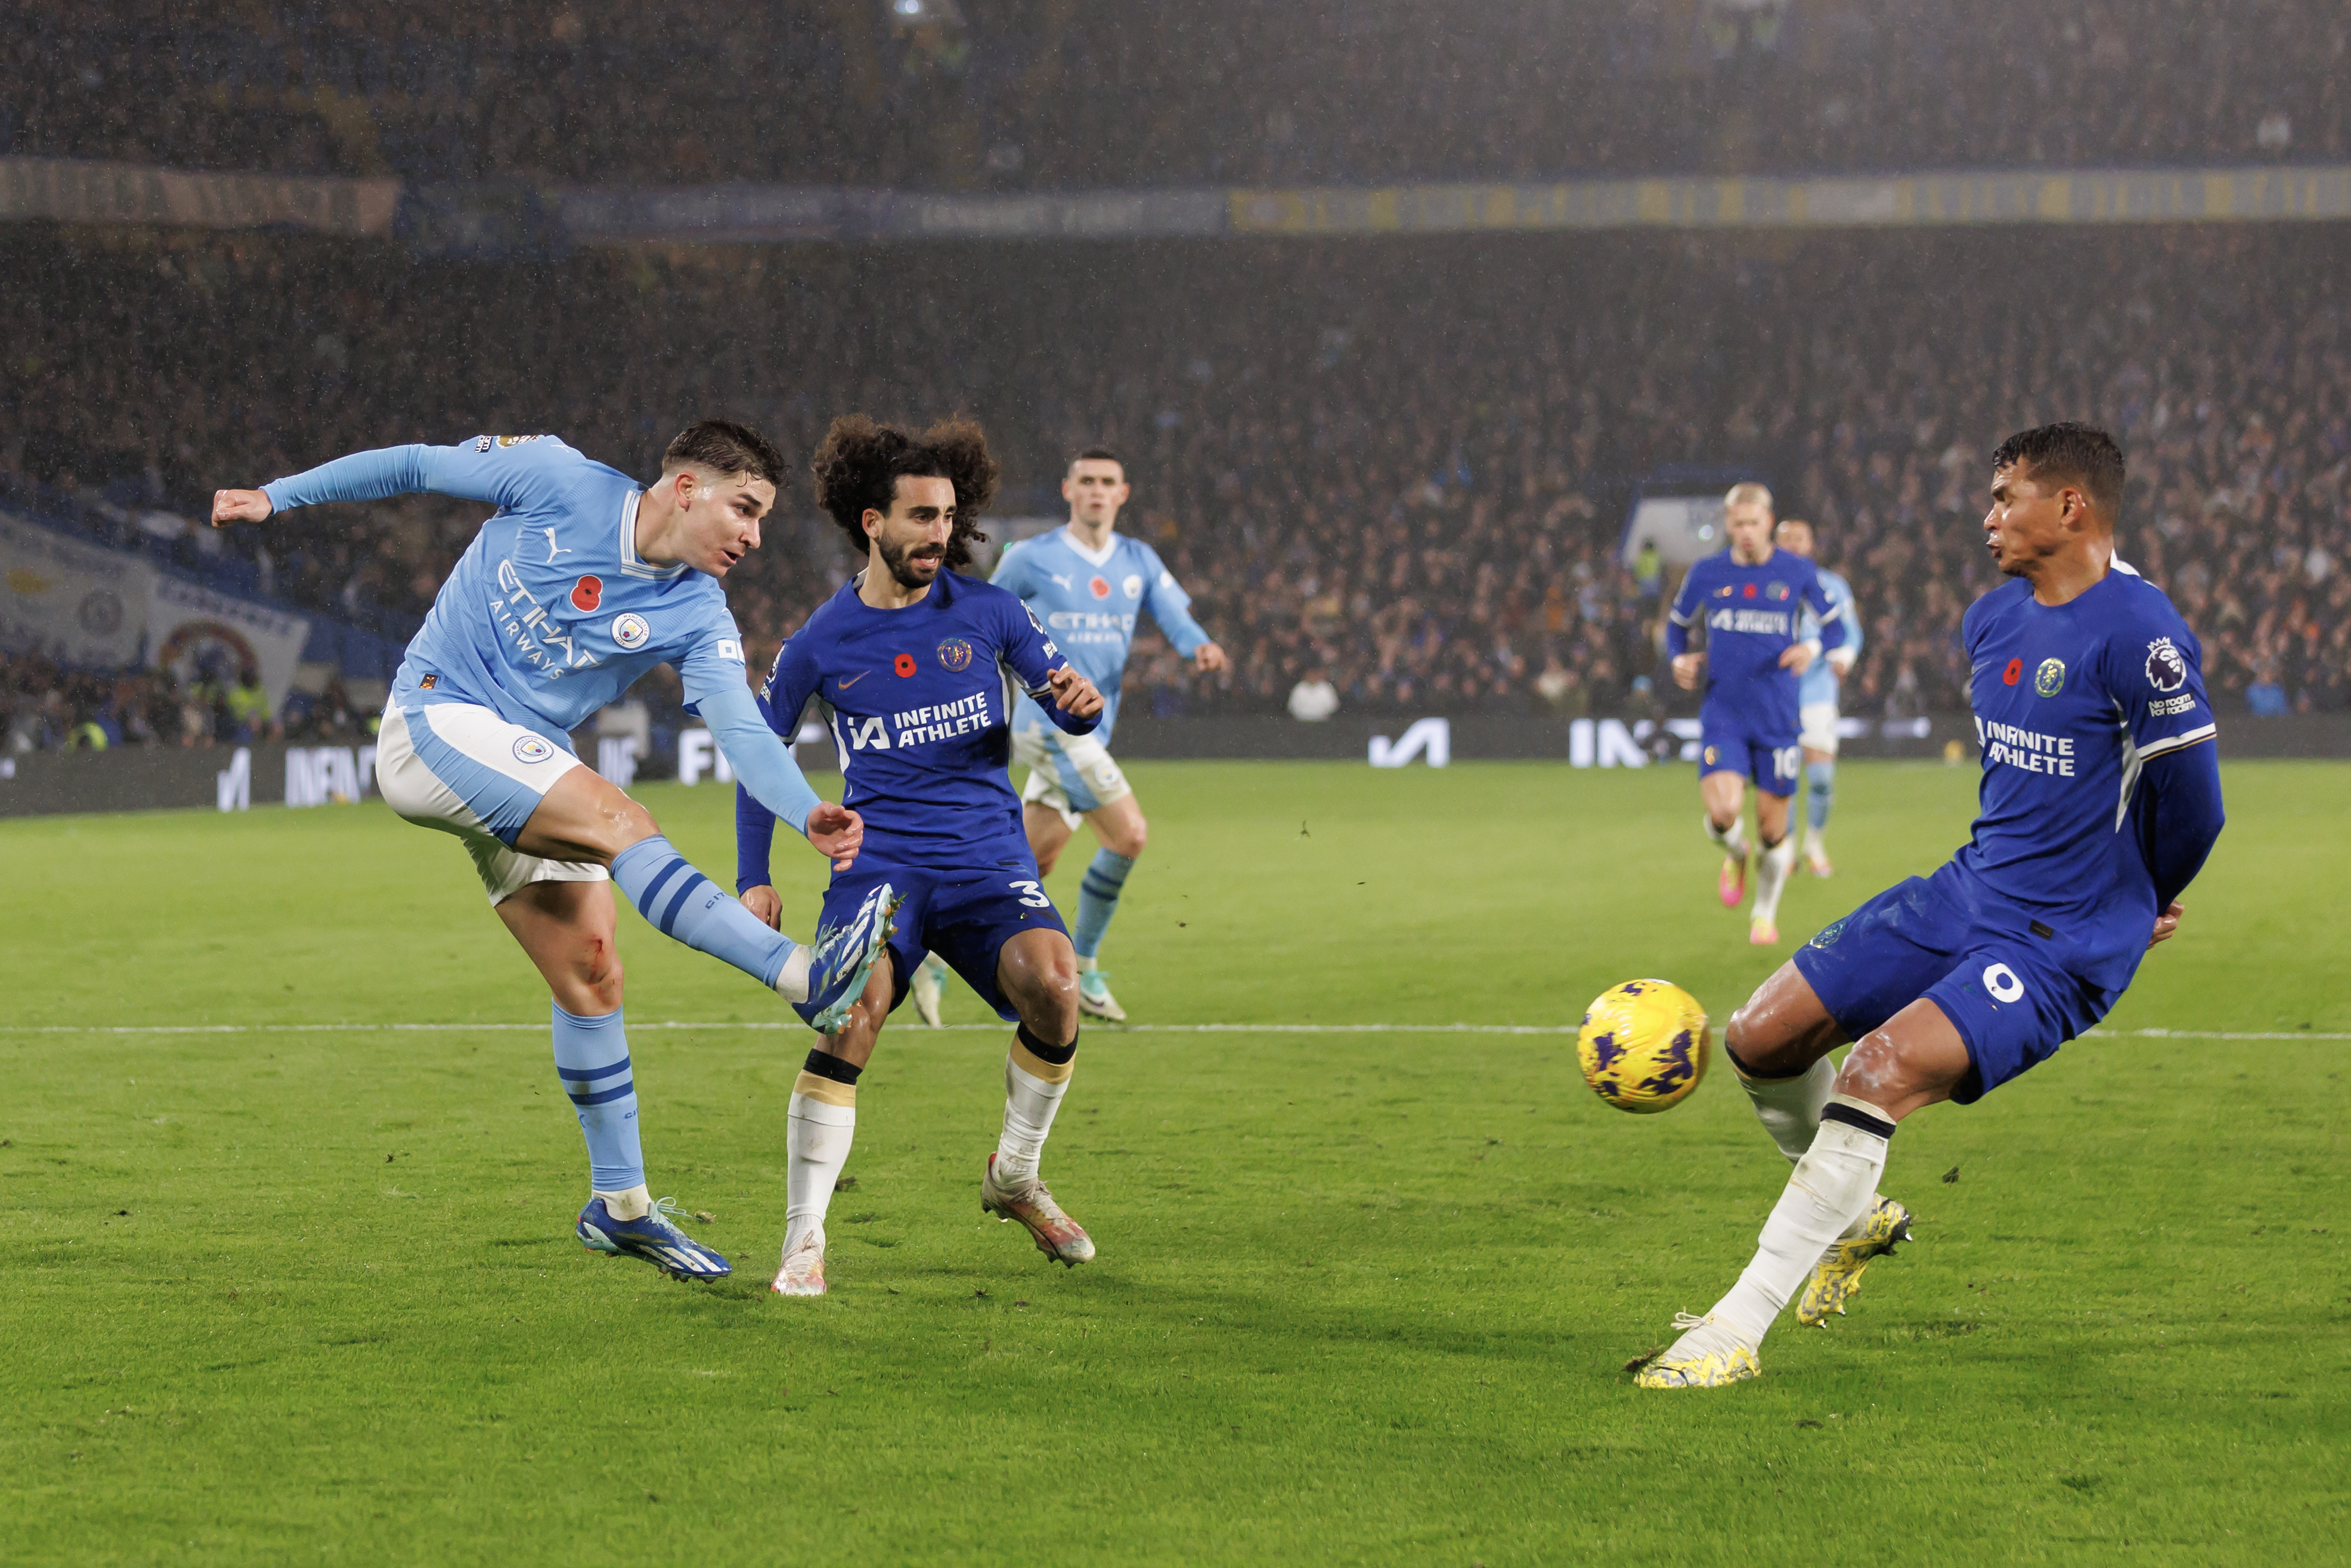 £1.15bn was spent on the starting XI's in Chelsea's 4-4 draw with Man City this season